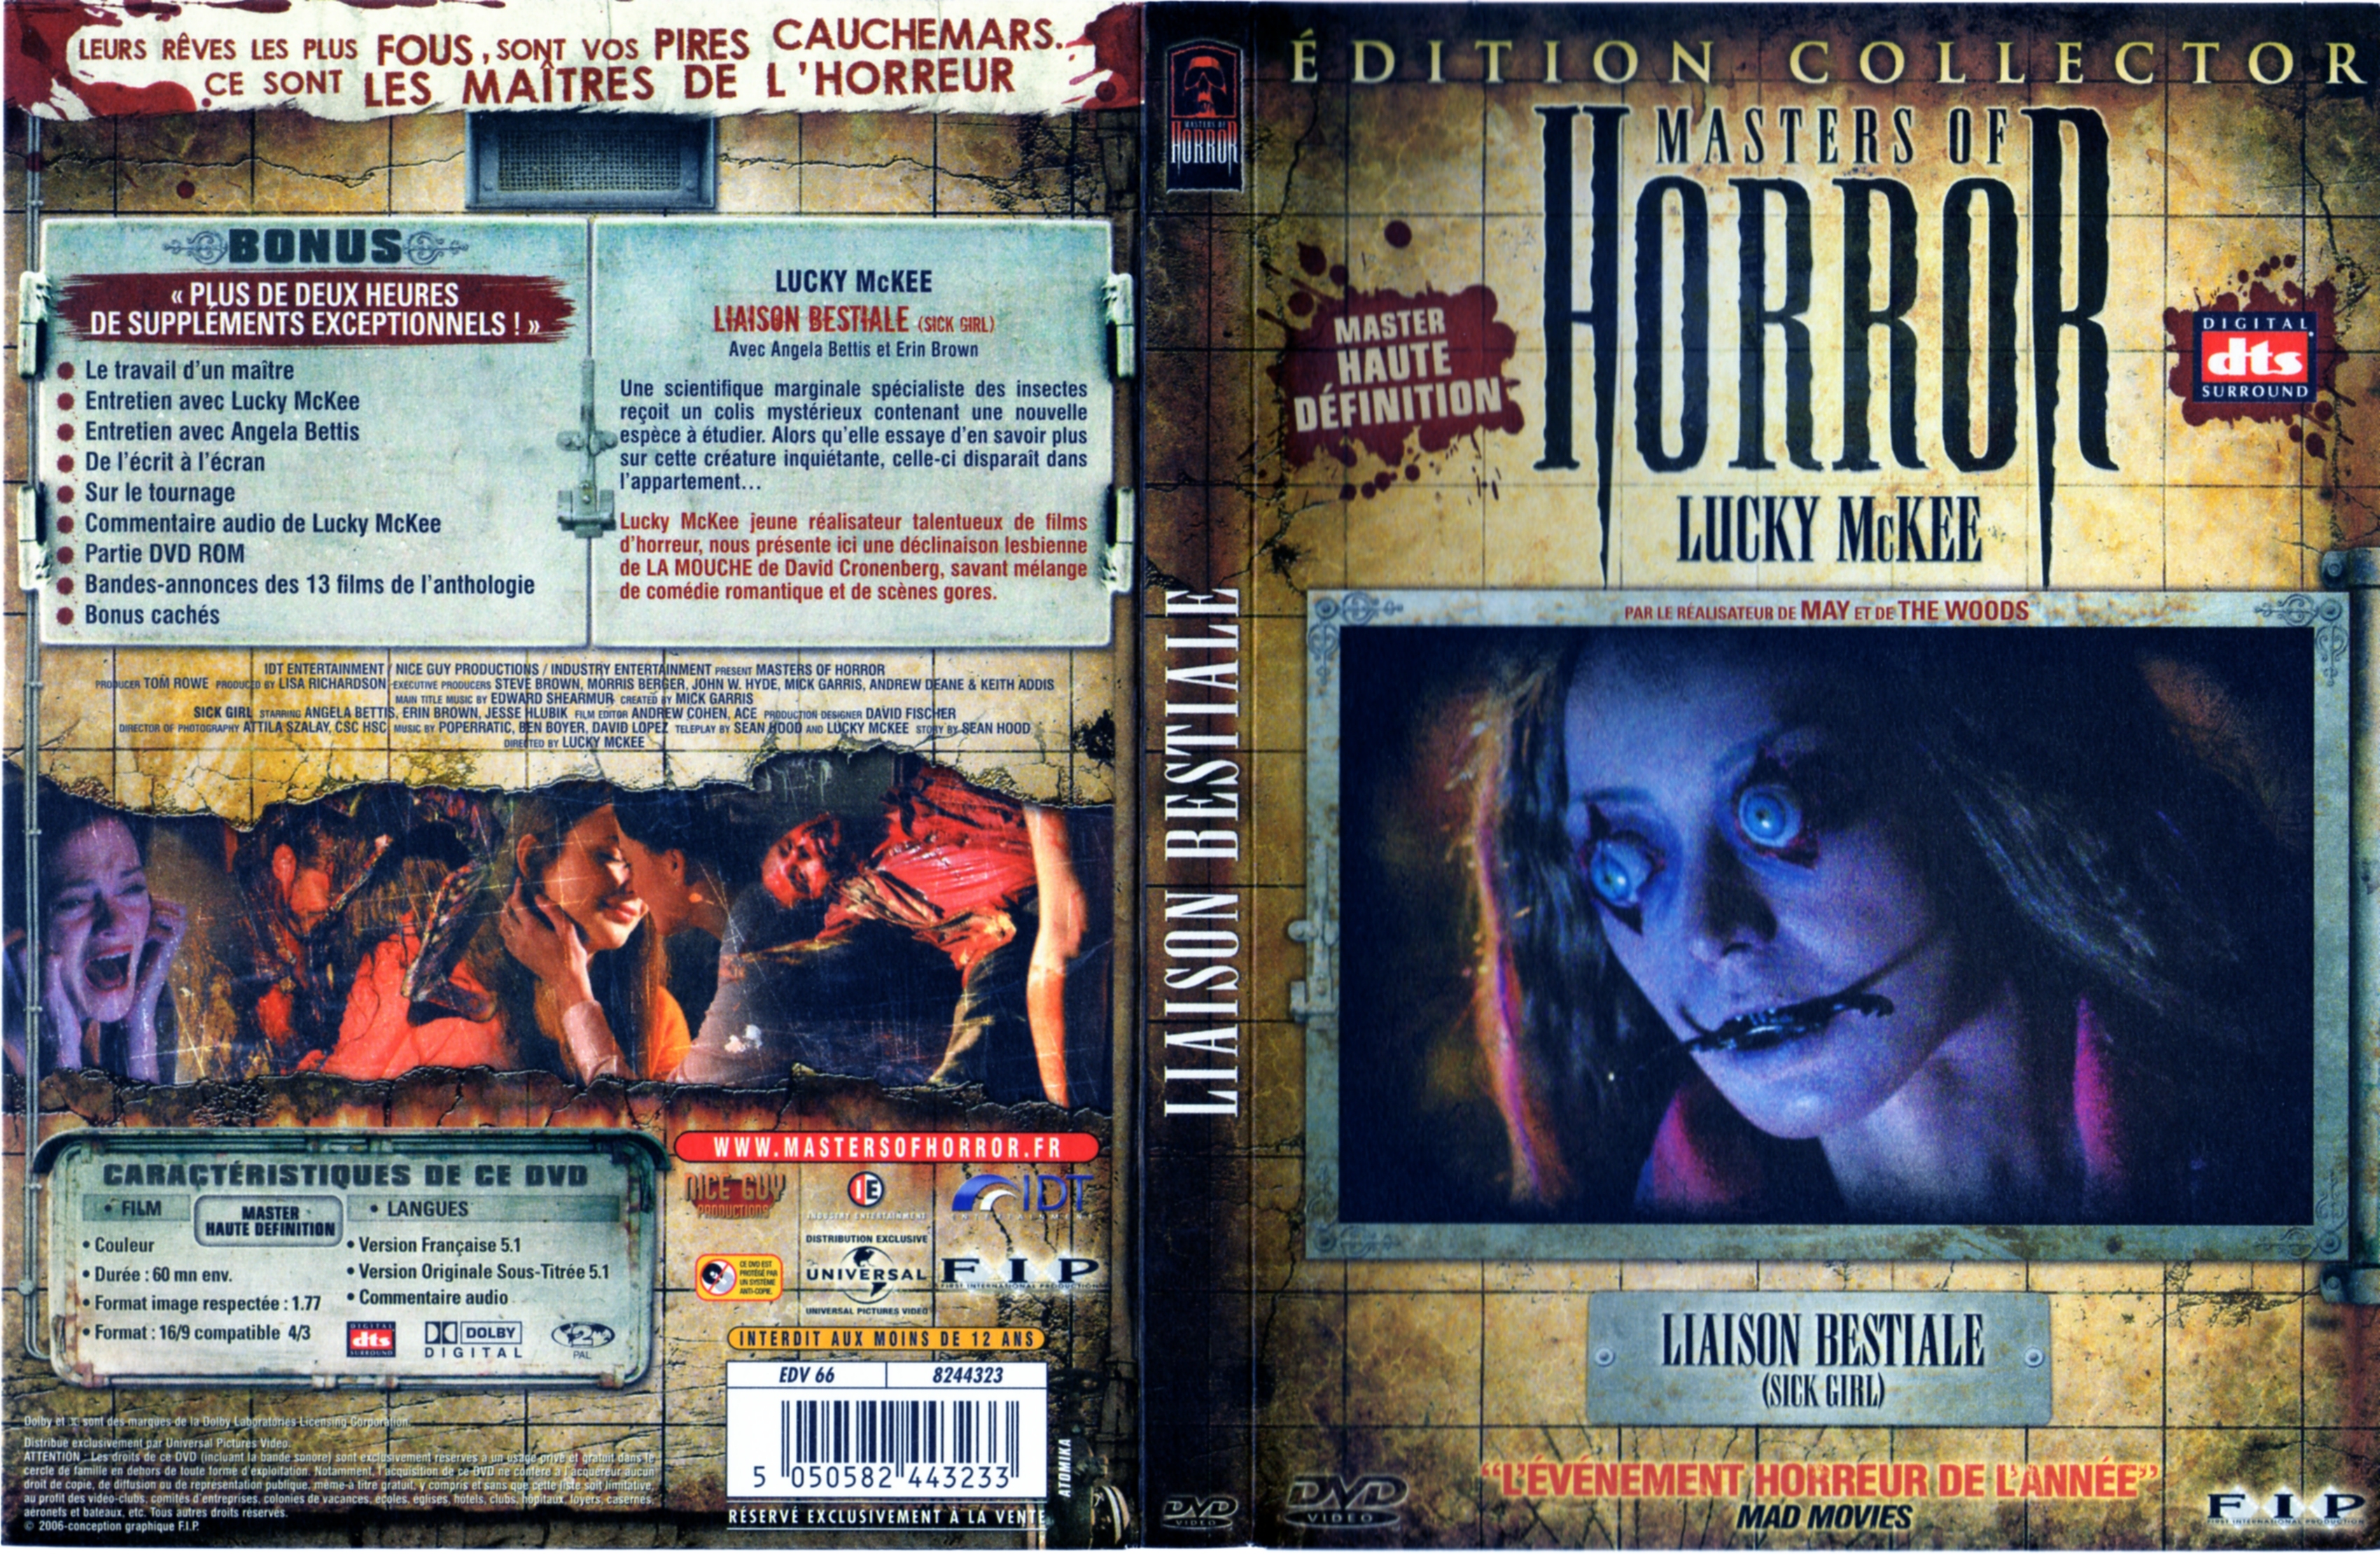 Jaquette DVD Masters of horror - liaison bestiale